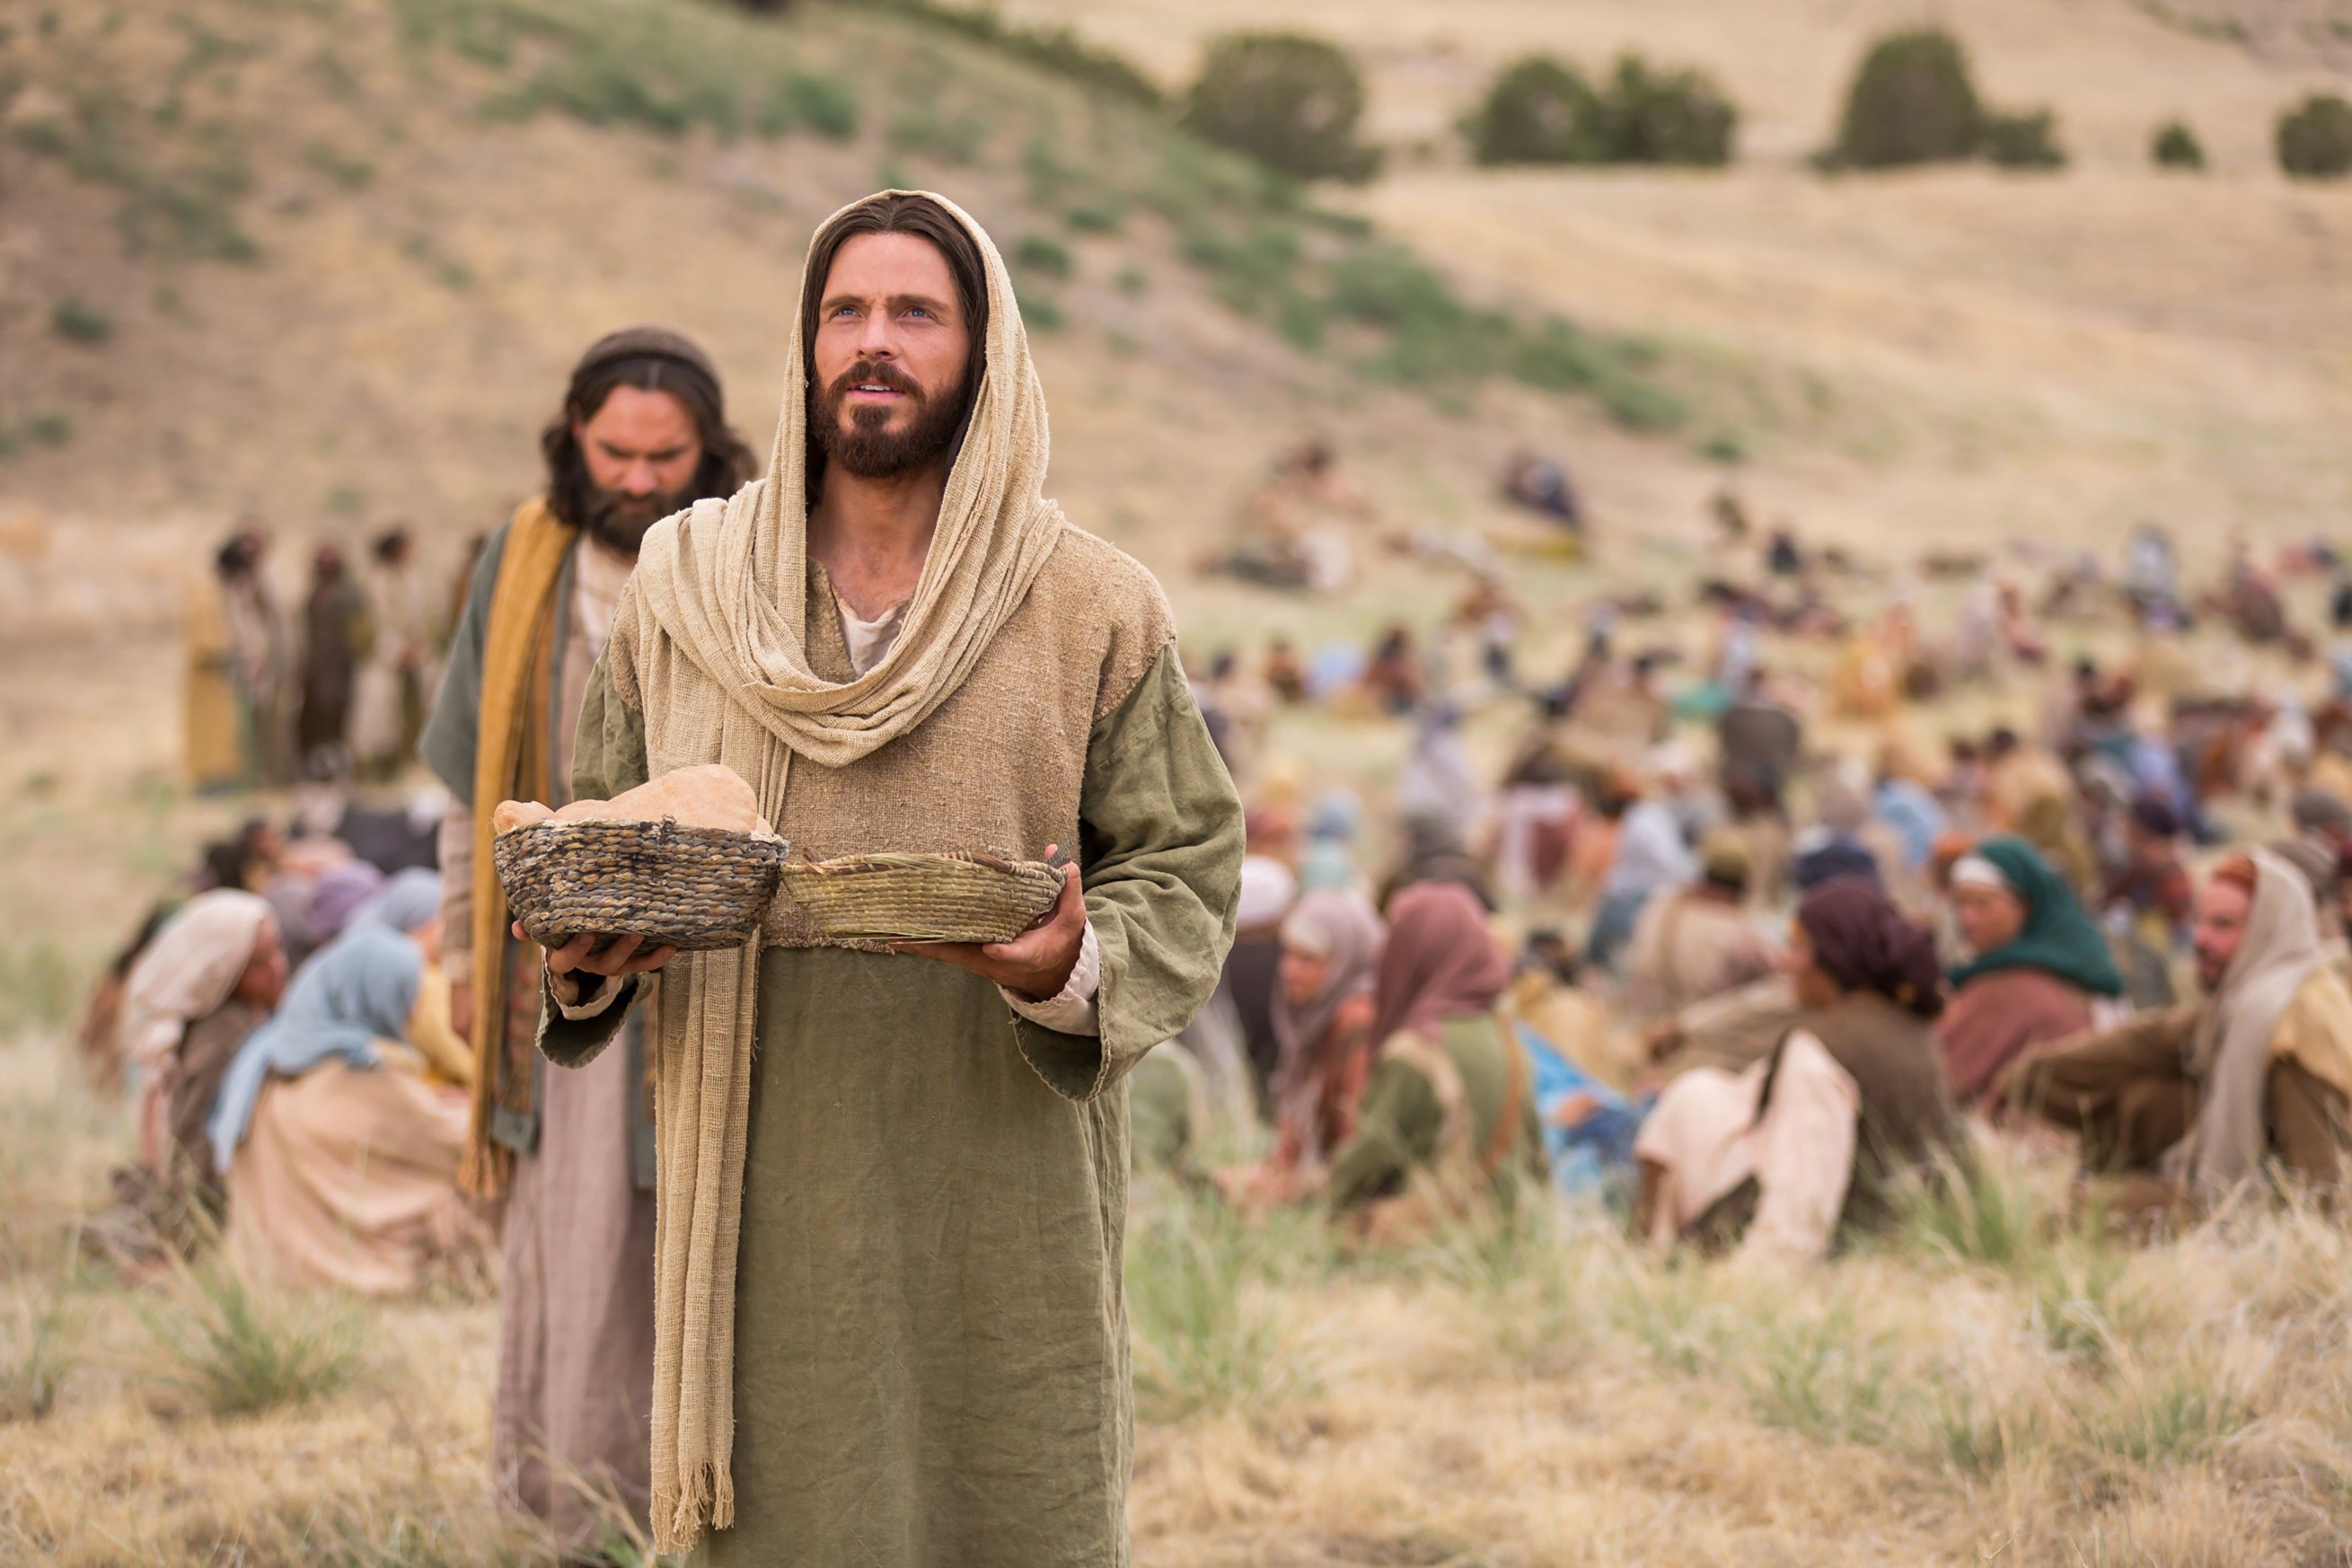 Jesus blesses the bread and fish to feed the people gathered to hear His teachings.